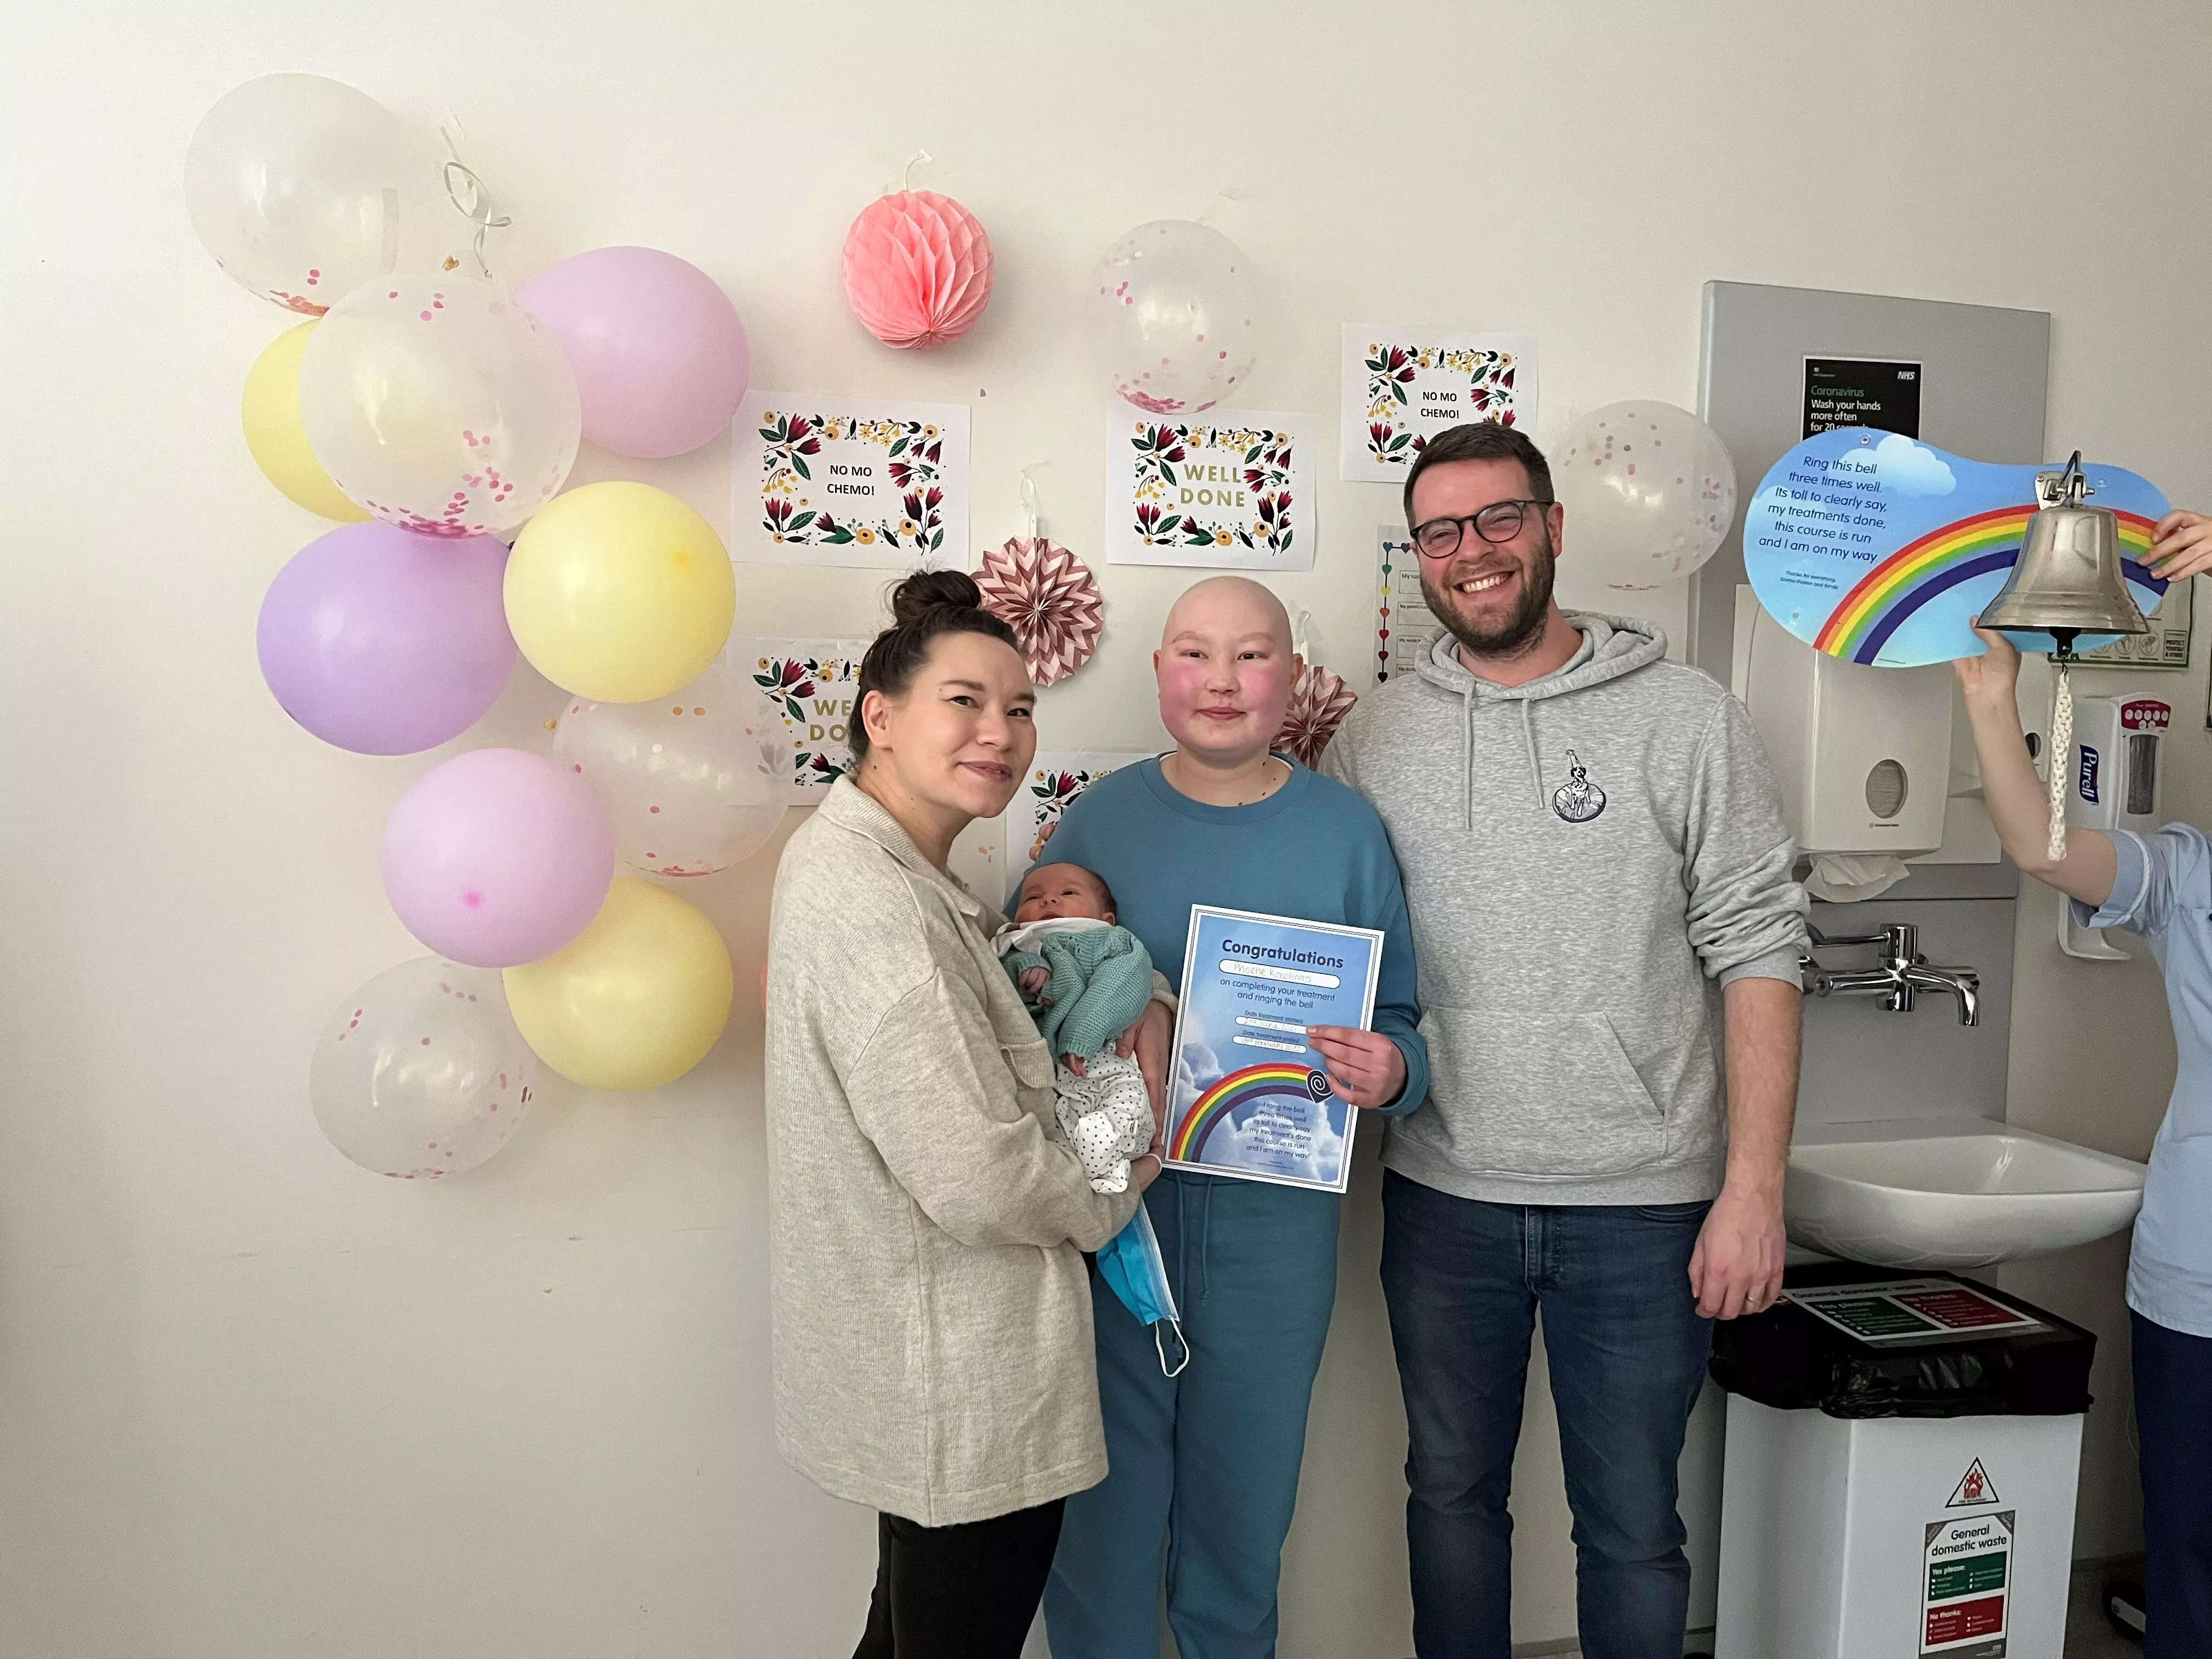 Phoebe Daniel with her family in a hospital room after she completed a chemotherapy treatment.